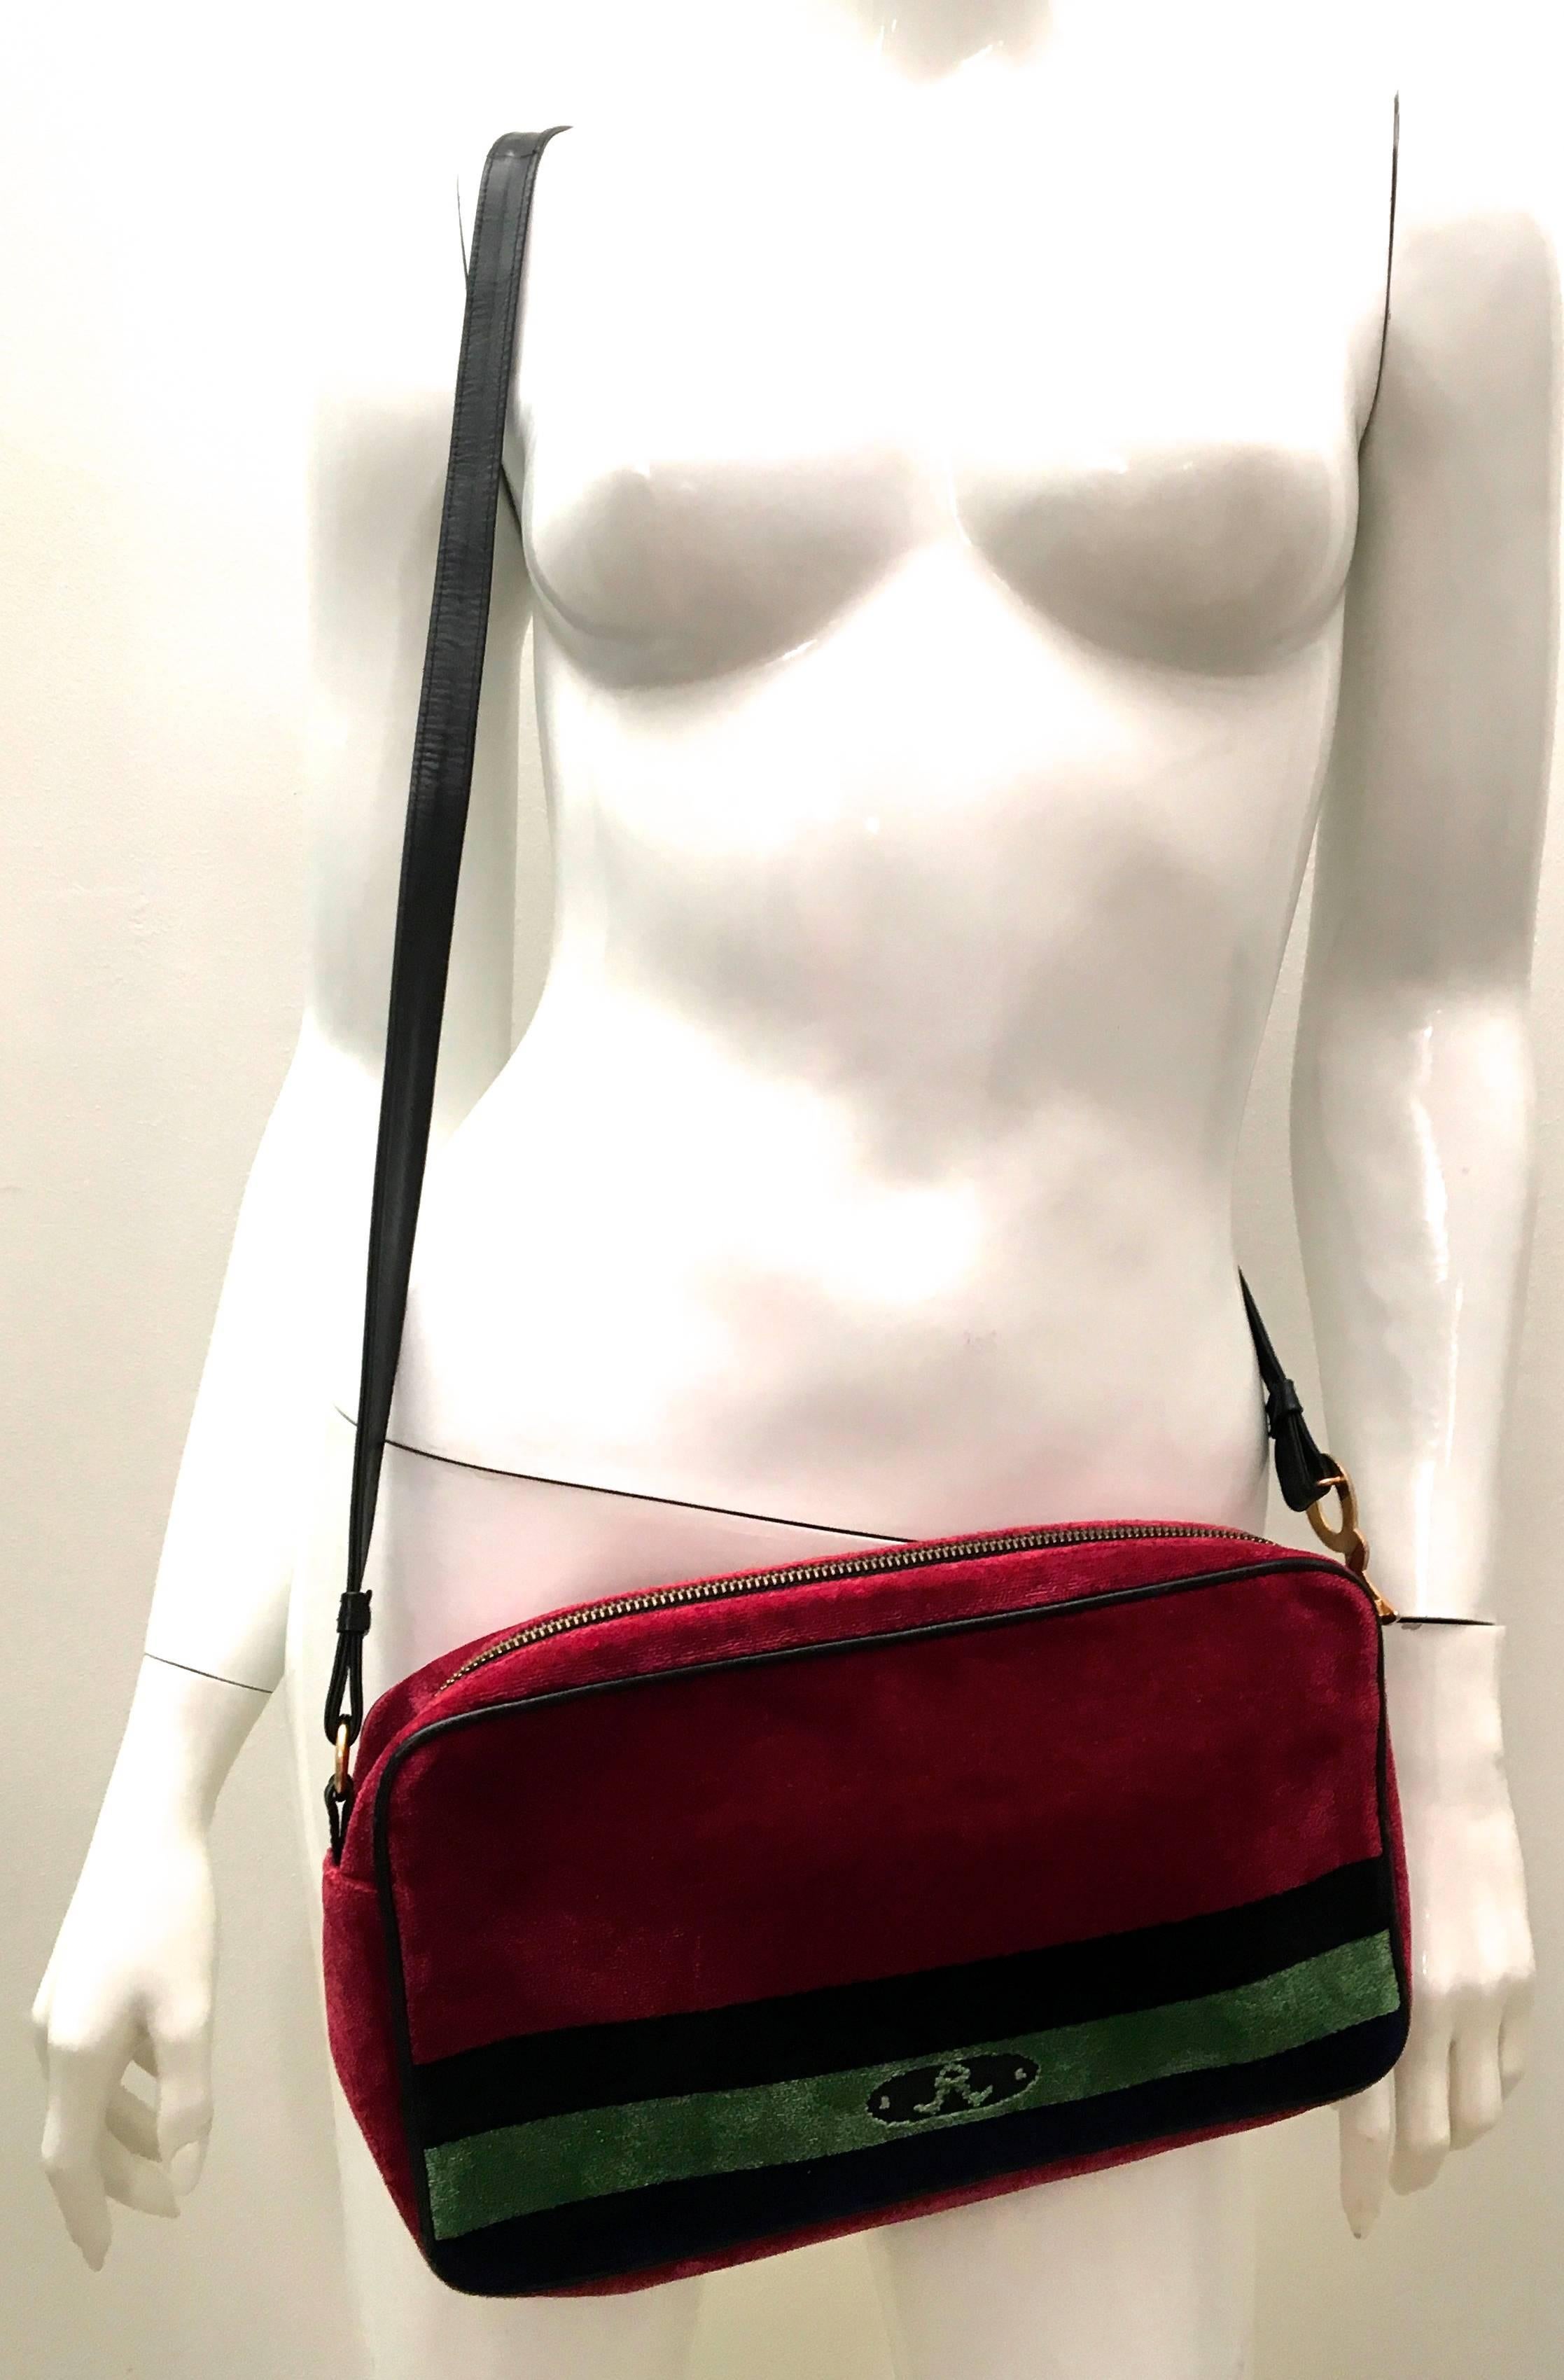 Presented here is a beautiful bag from Roberta di Camerino. The bag is comprised of a gorgeous bag that has burgundy, black, green and blue soft velvety fabric on the exterior. There is a gold tone metal zipper on the purse. There is an iconic gold